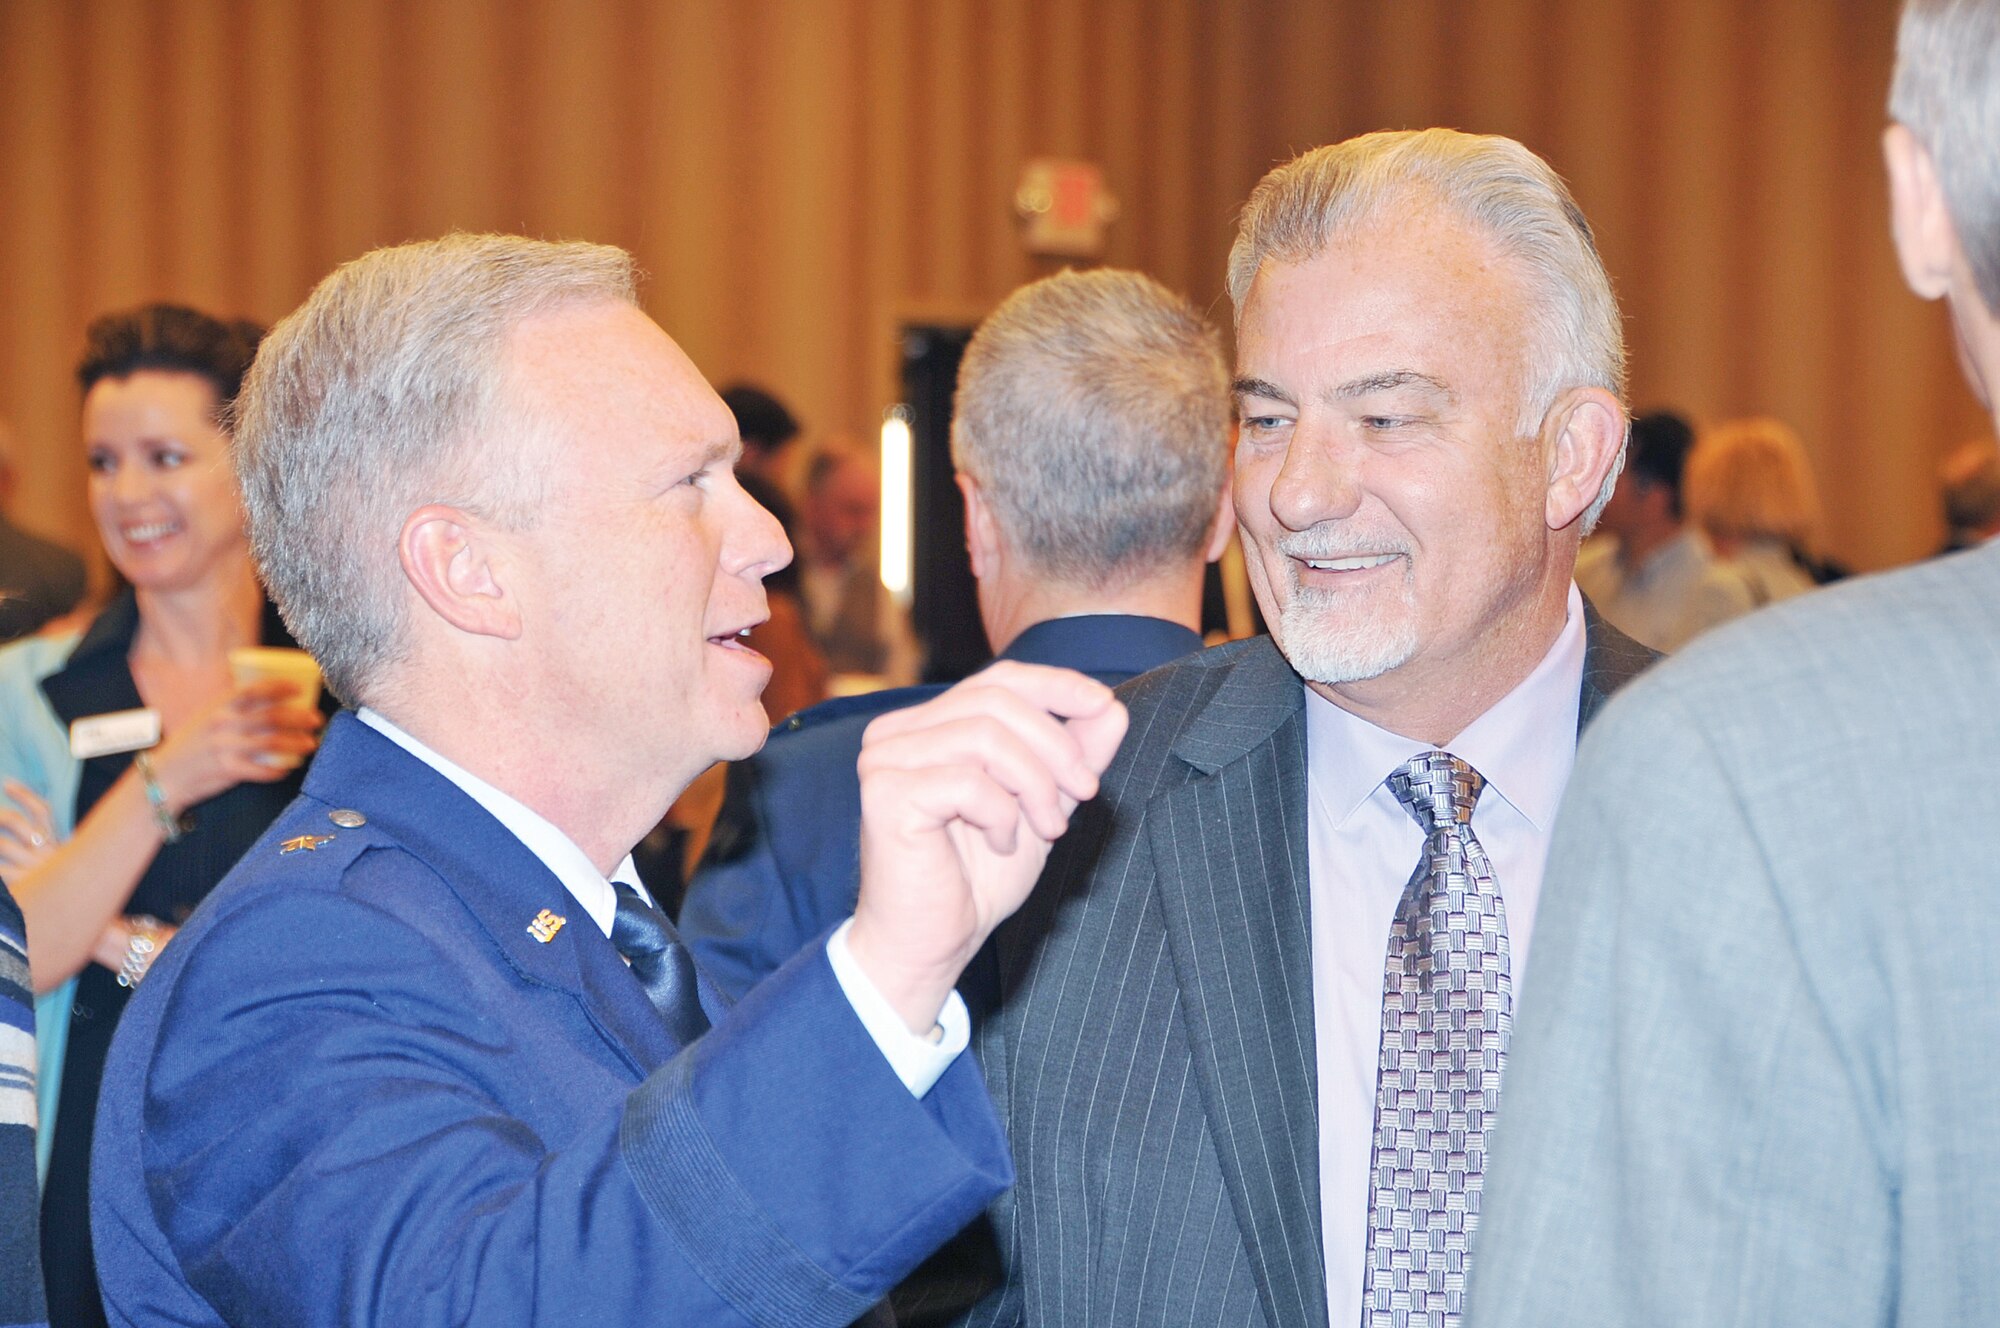 Brig. Gen. John F. Thompson, program executive officer for Strategic Systems at Kirtland AFB, left, and Michael Chase, board member of the Kirtland Partnership Directors Board, visit during the event.